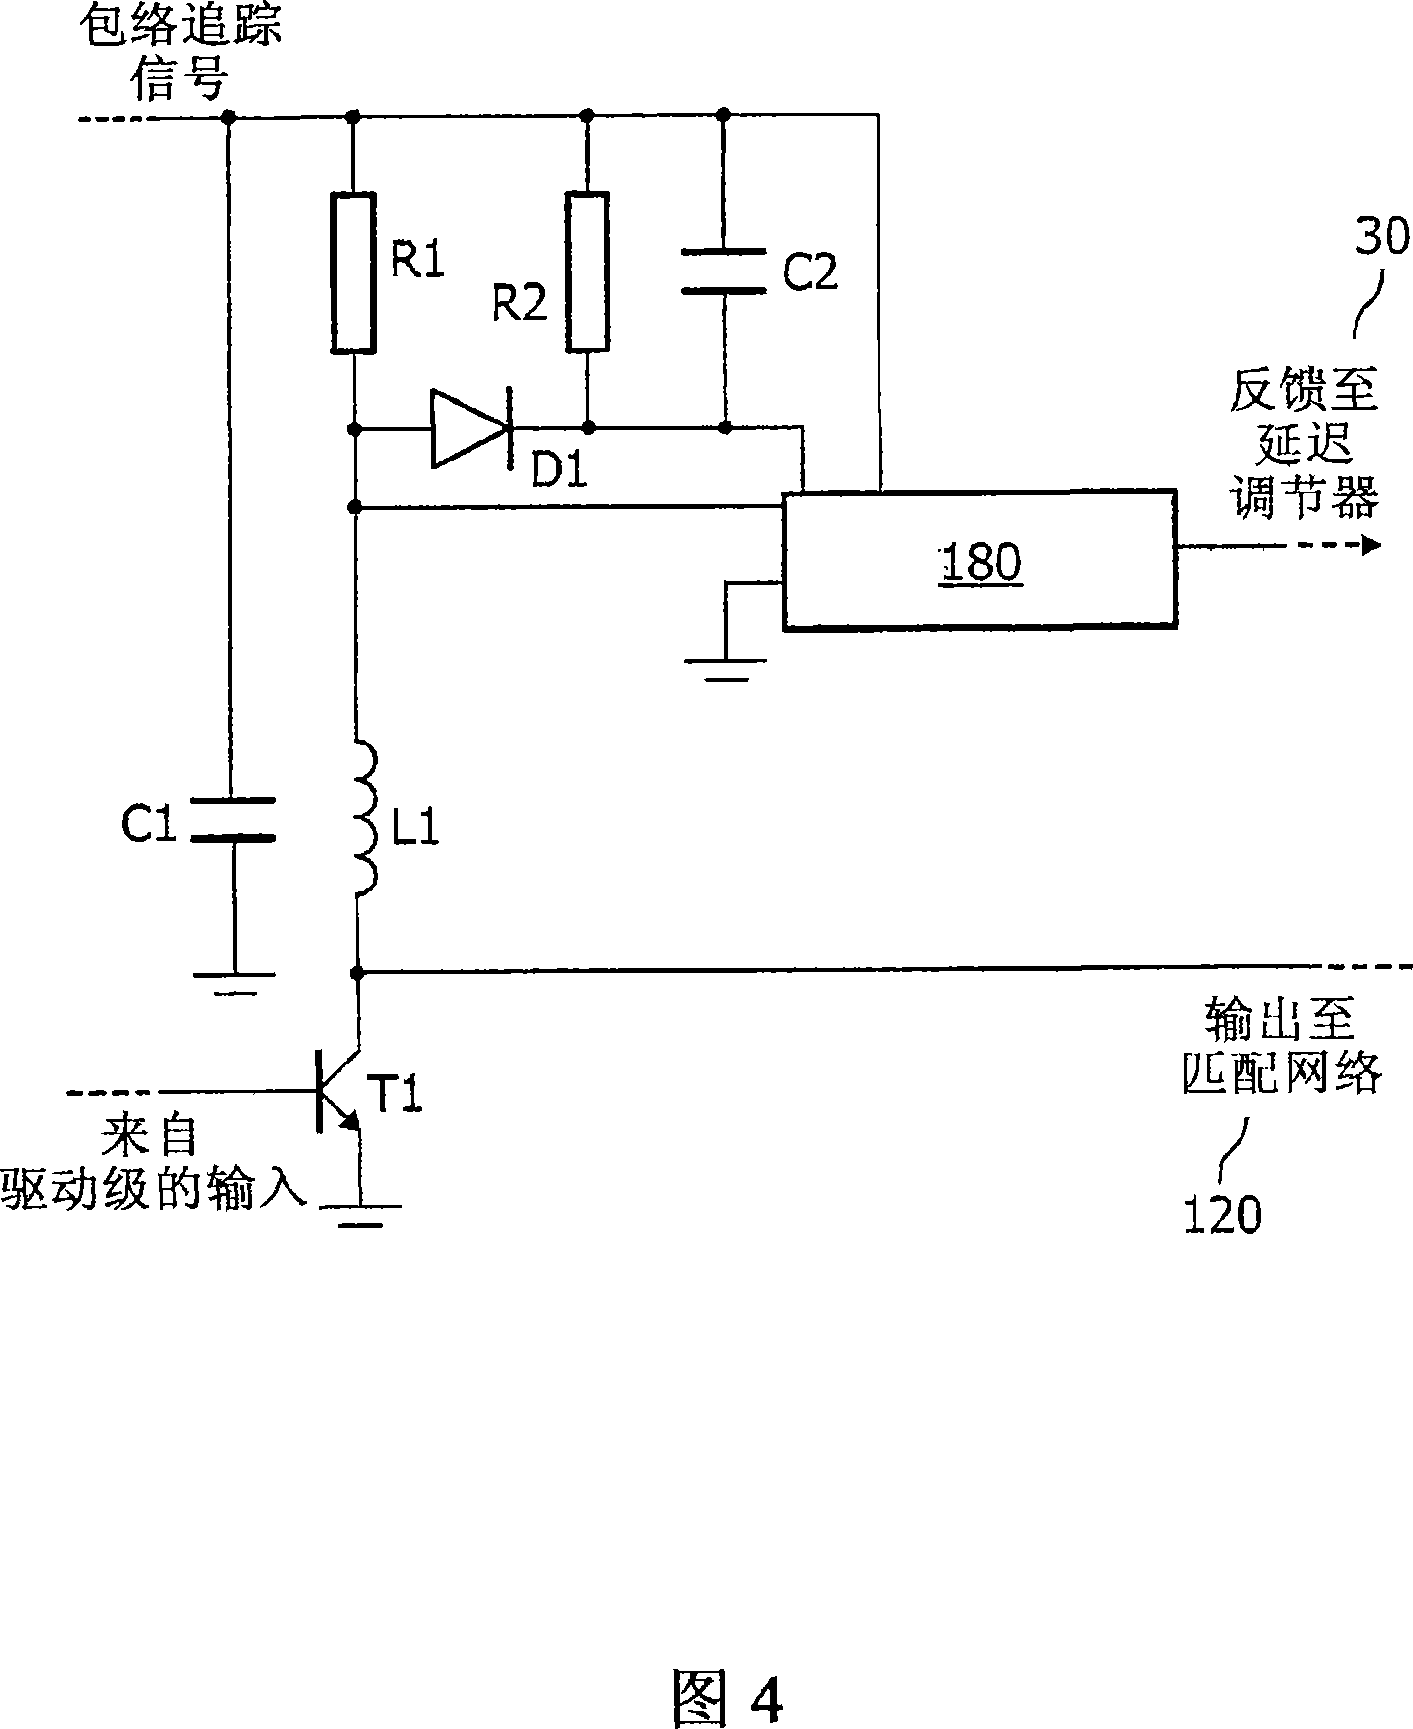 RF transmitter with compensation of differential path delay